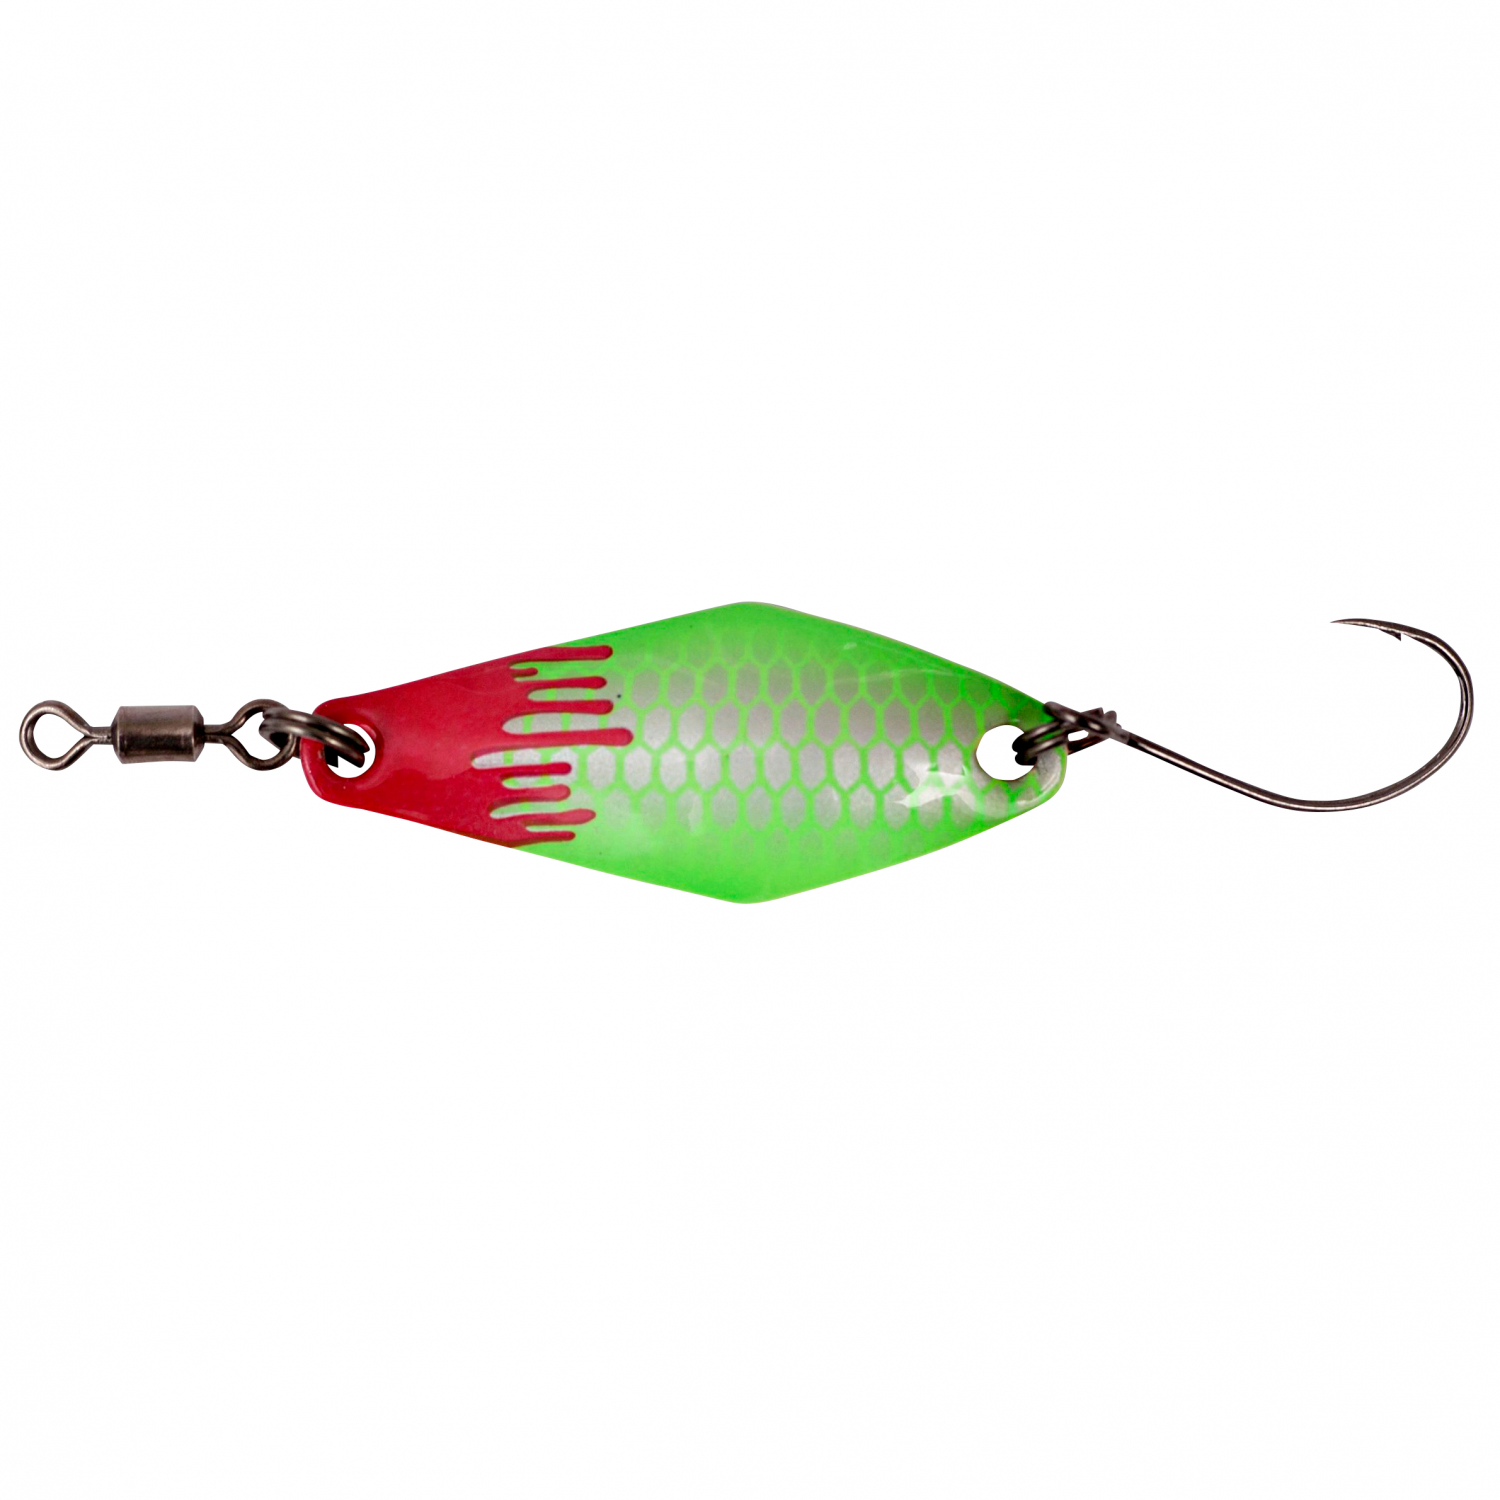 Magic Trout Bloddy Zoom Spoon (silver/green) 